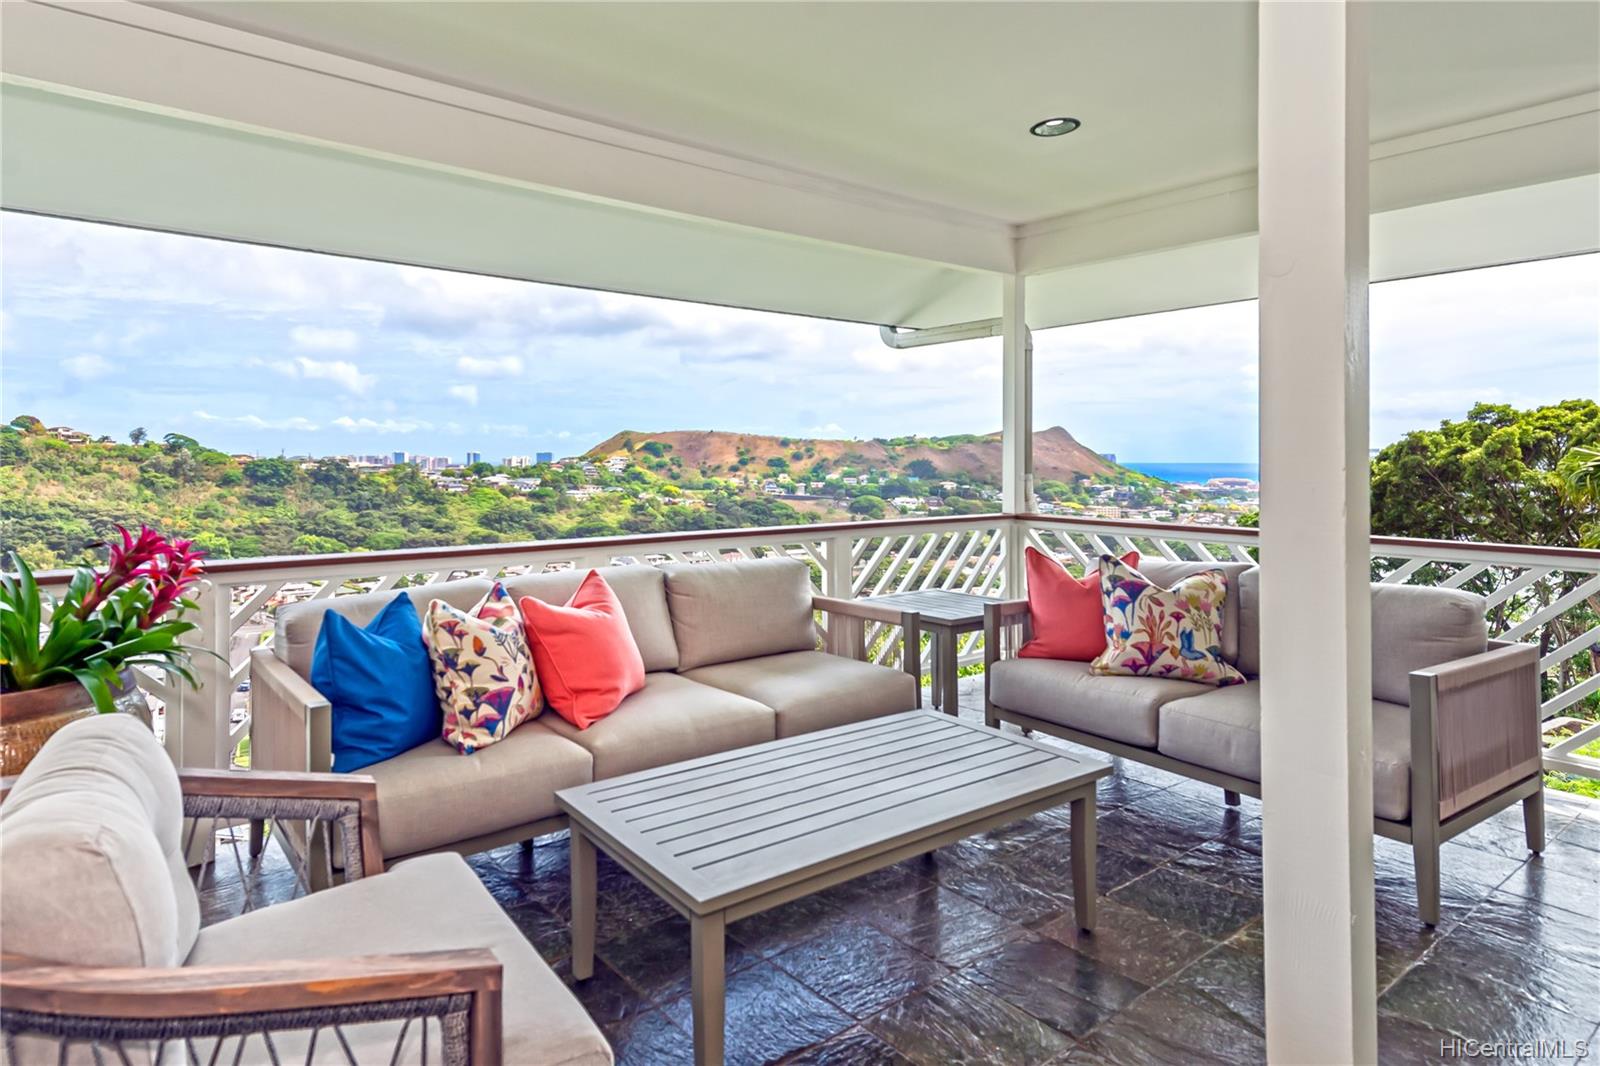 Wonderful covered lanai overlooking beautiful Punchbowl, ocean and valley views - SO Relaxing!